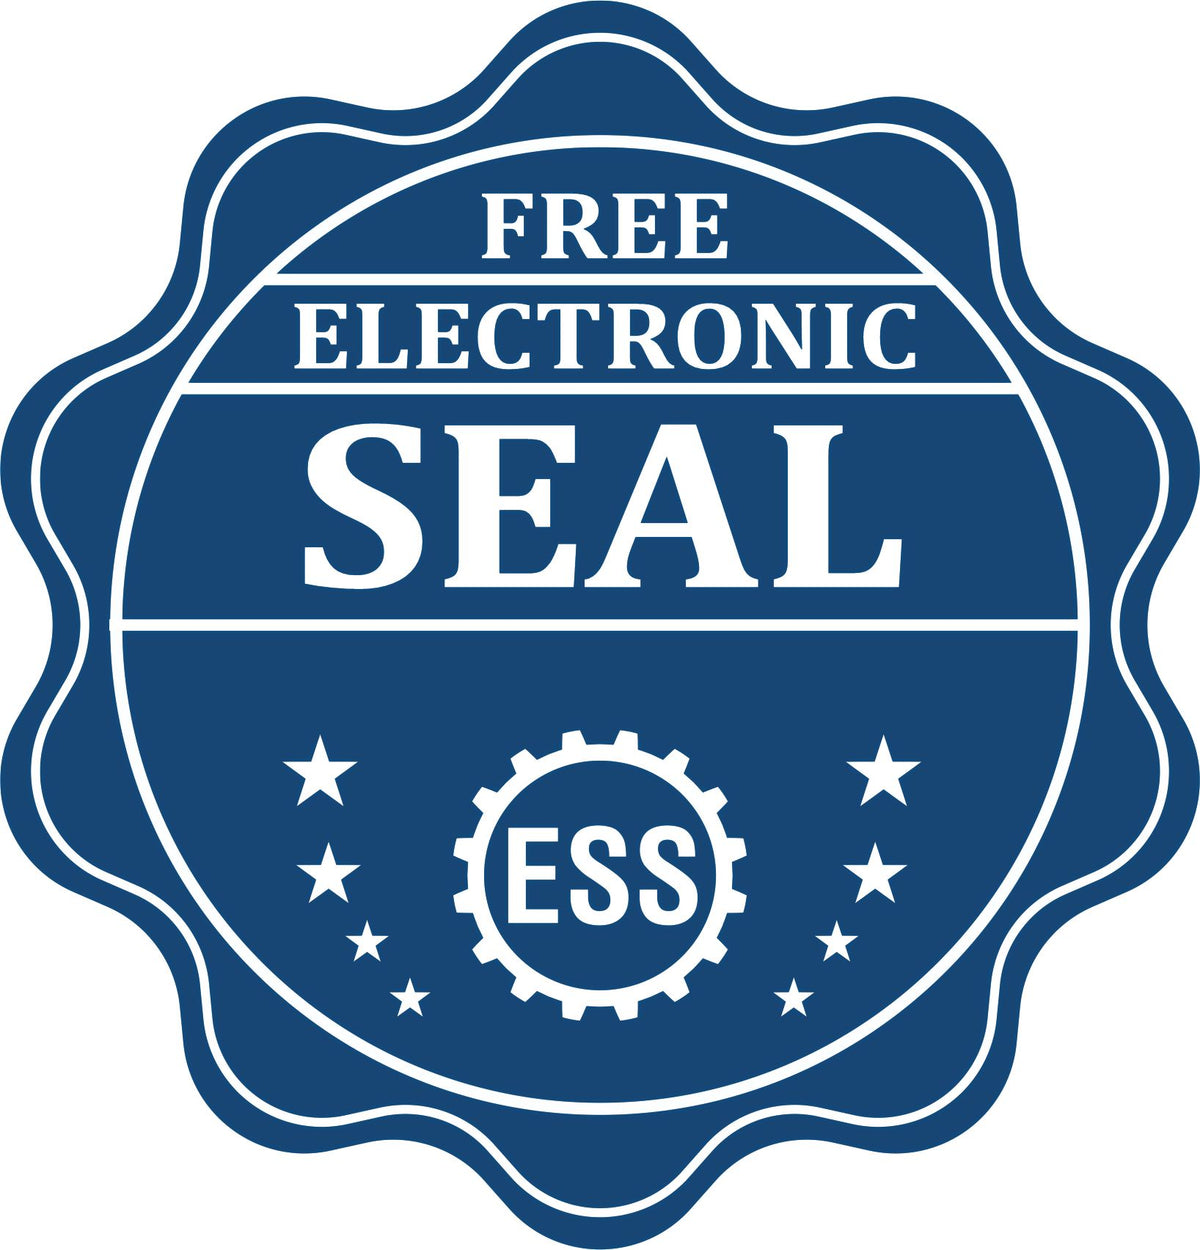 A badge showing a free electronic seal for the Soft Alaska Professional Engineer Seal with stars and the ESS gear on the emblem.